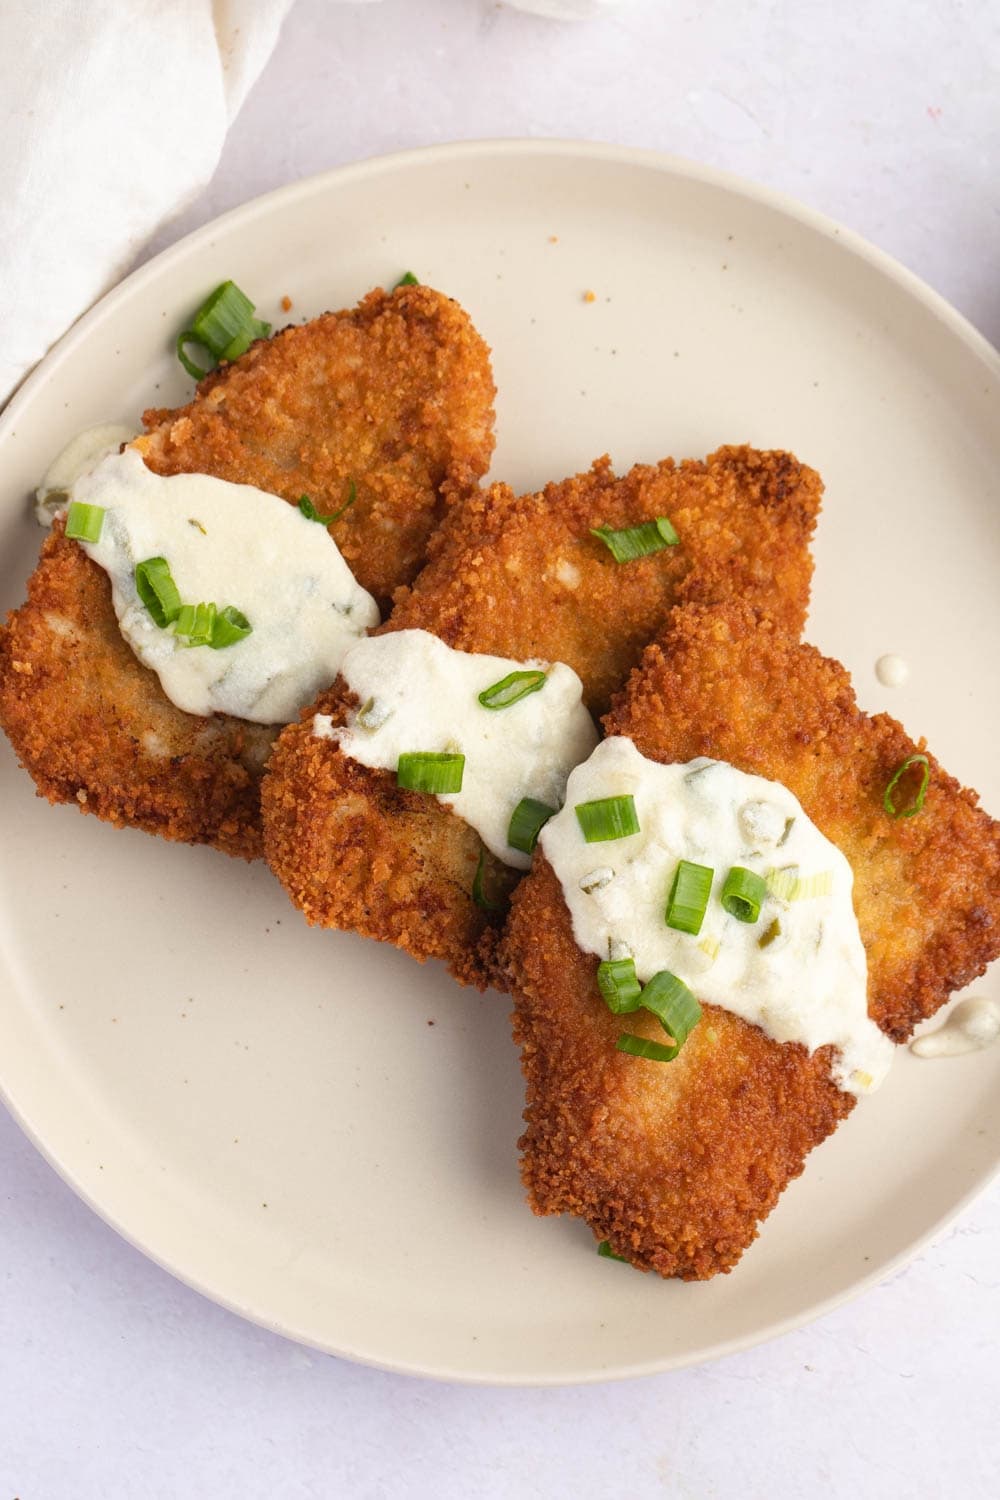 Crispy Soft and Juicy Pork Cutlets with Sour Cream and Chopped Chives on Top